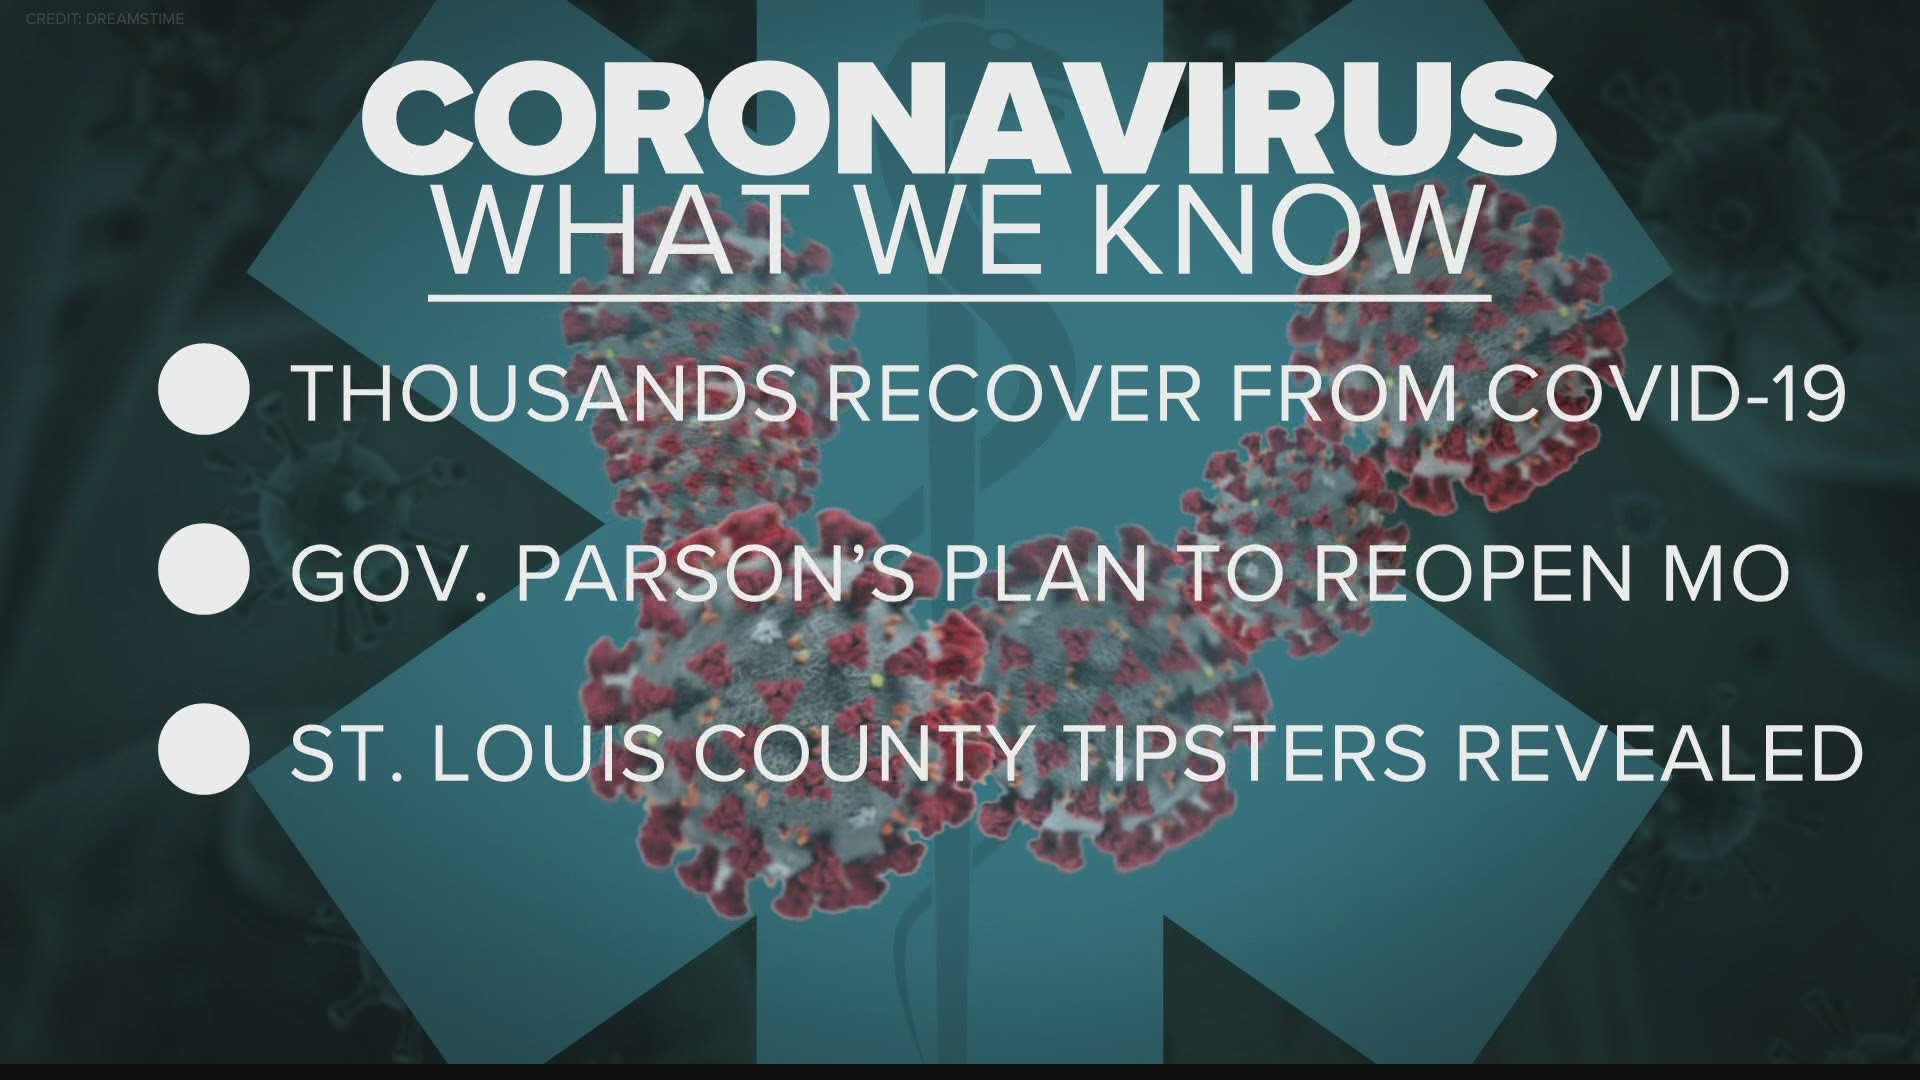 Coronavirus update: The latest news and numbers from our 10 p.m. newscast on Friday, April 24